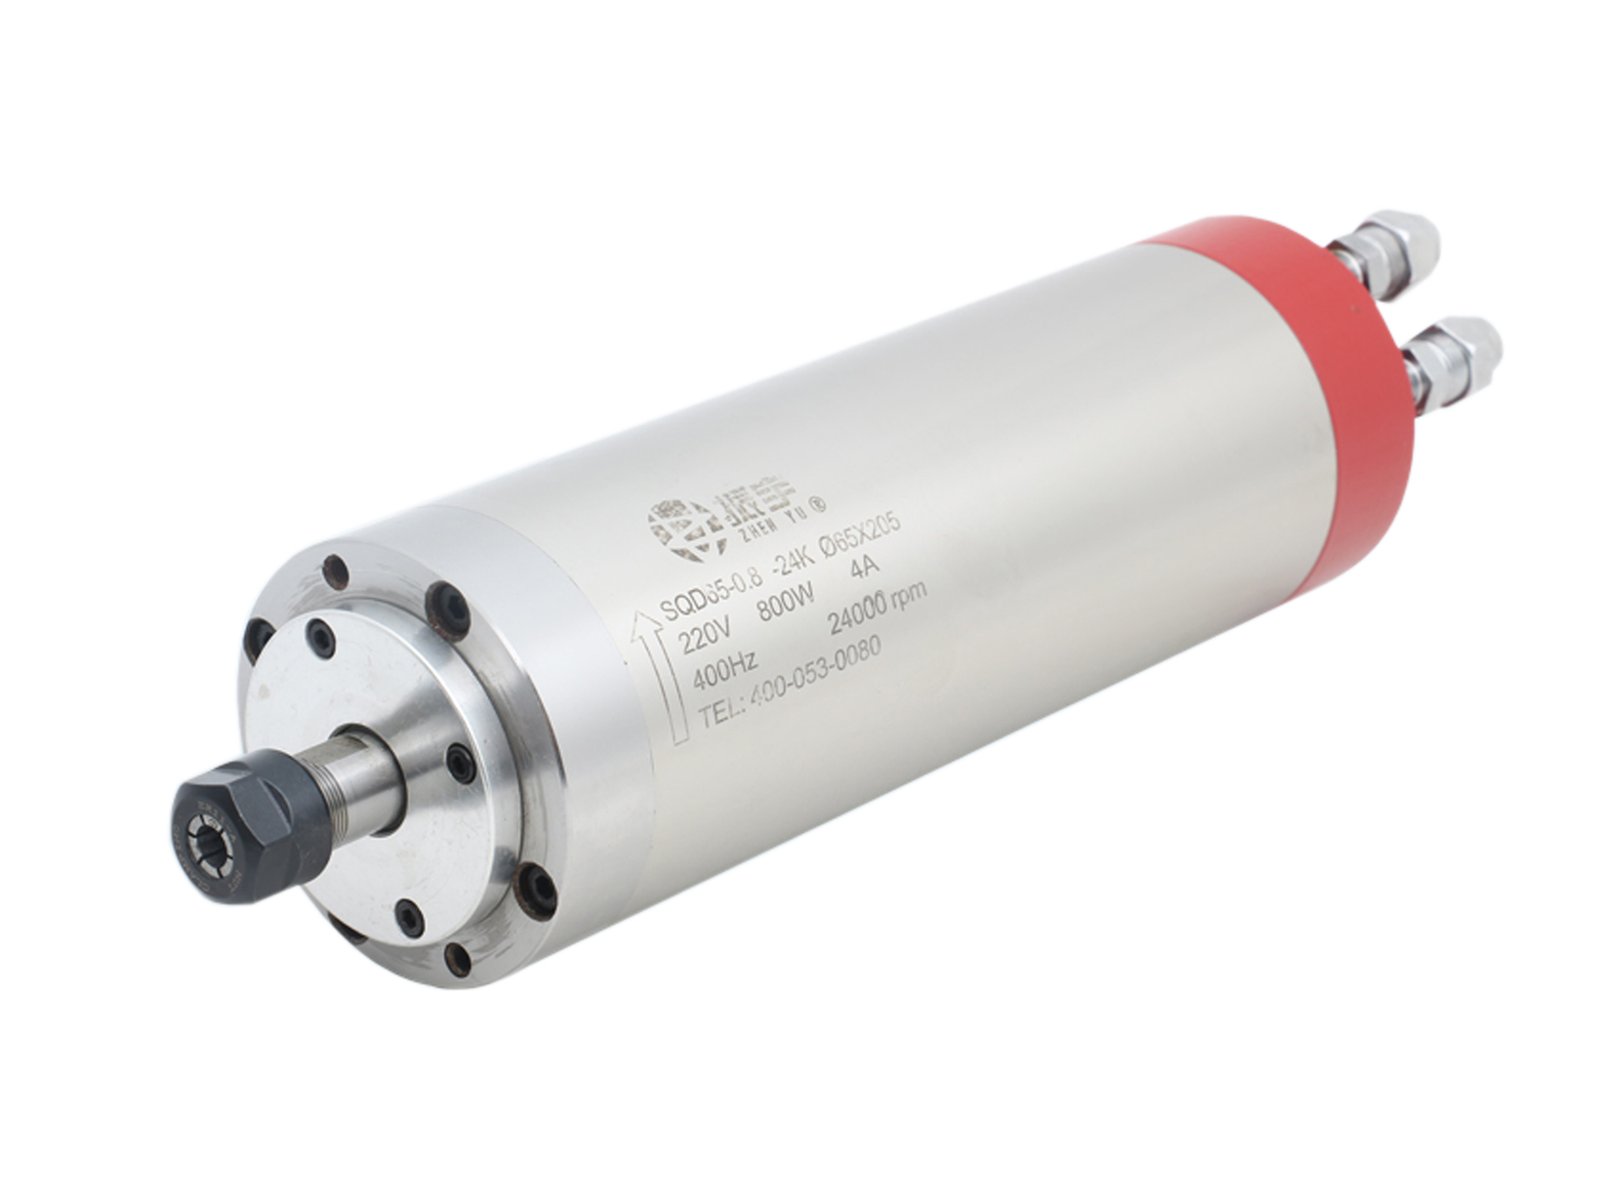 Details about   220V/800W/ER11/Φ65MM Water Cooling CNC Spindle Motor For CNC Router 4 Bearing 